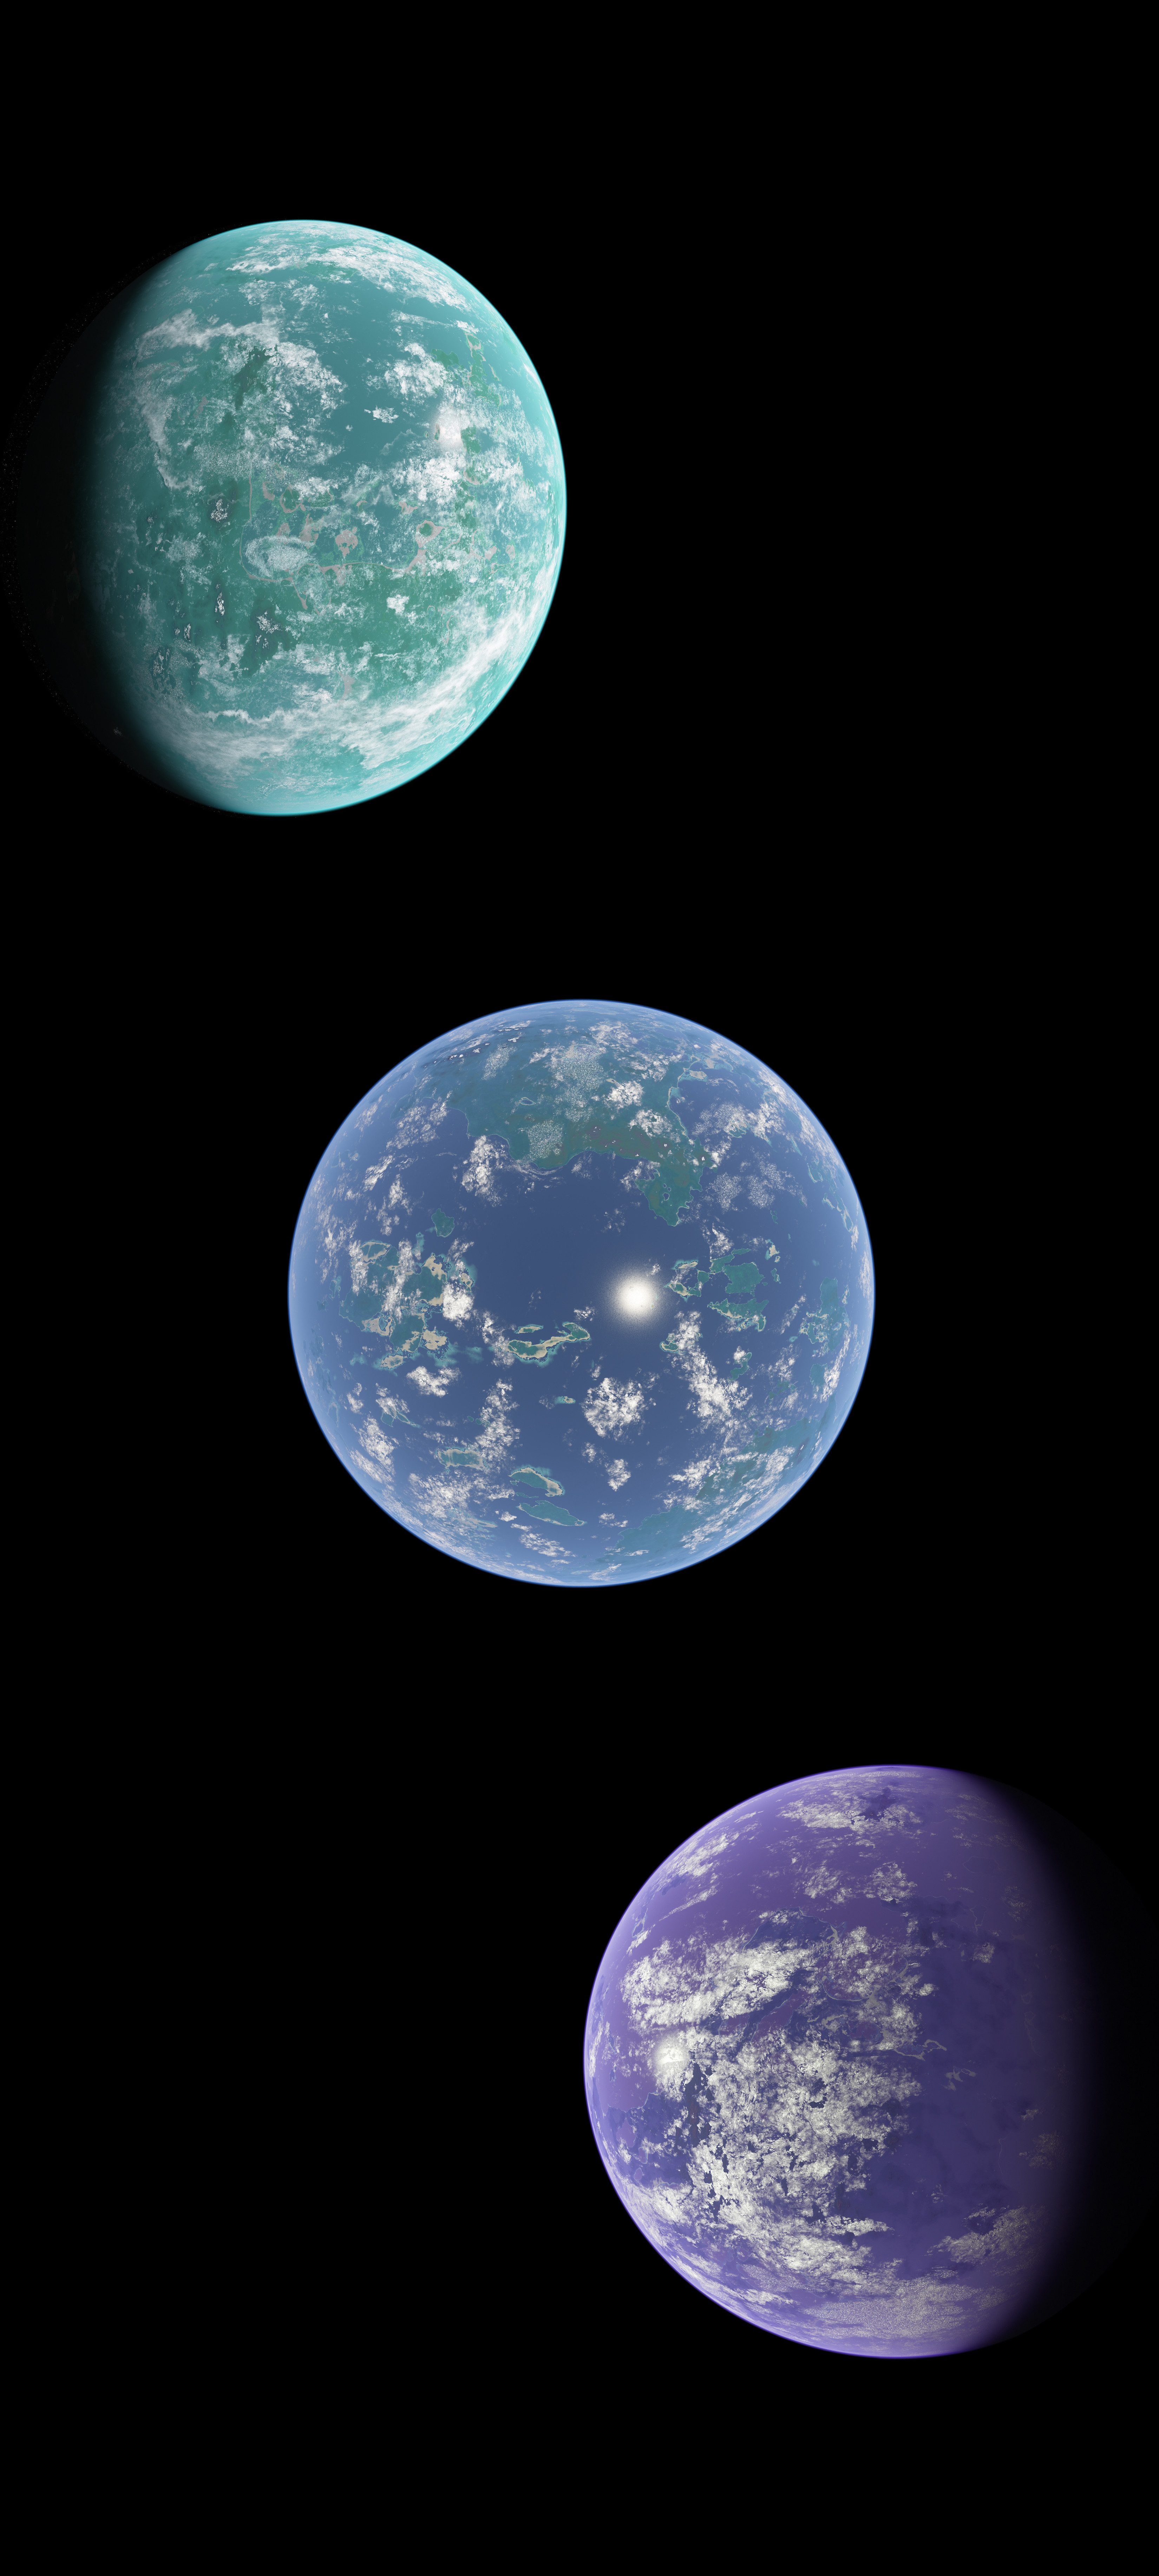 An arrangement of 3 exoplanets to explore how the atmospheres can look different based on the chemistry present and incoming flux. 